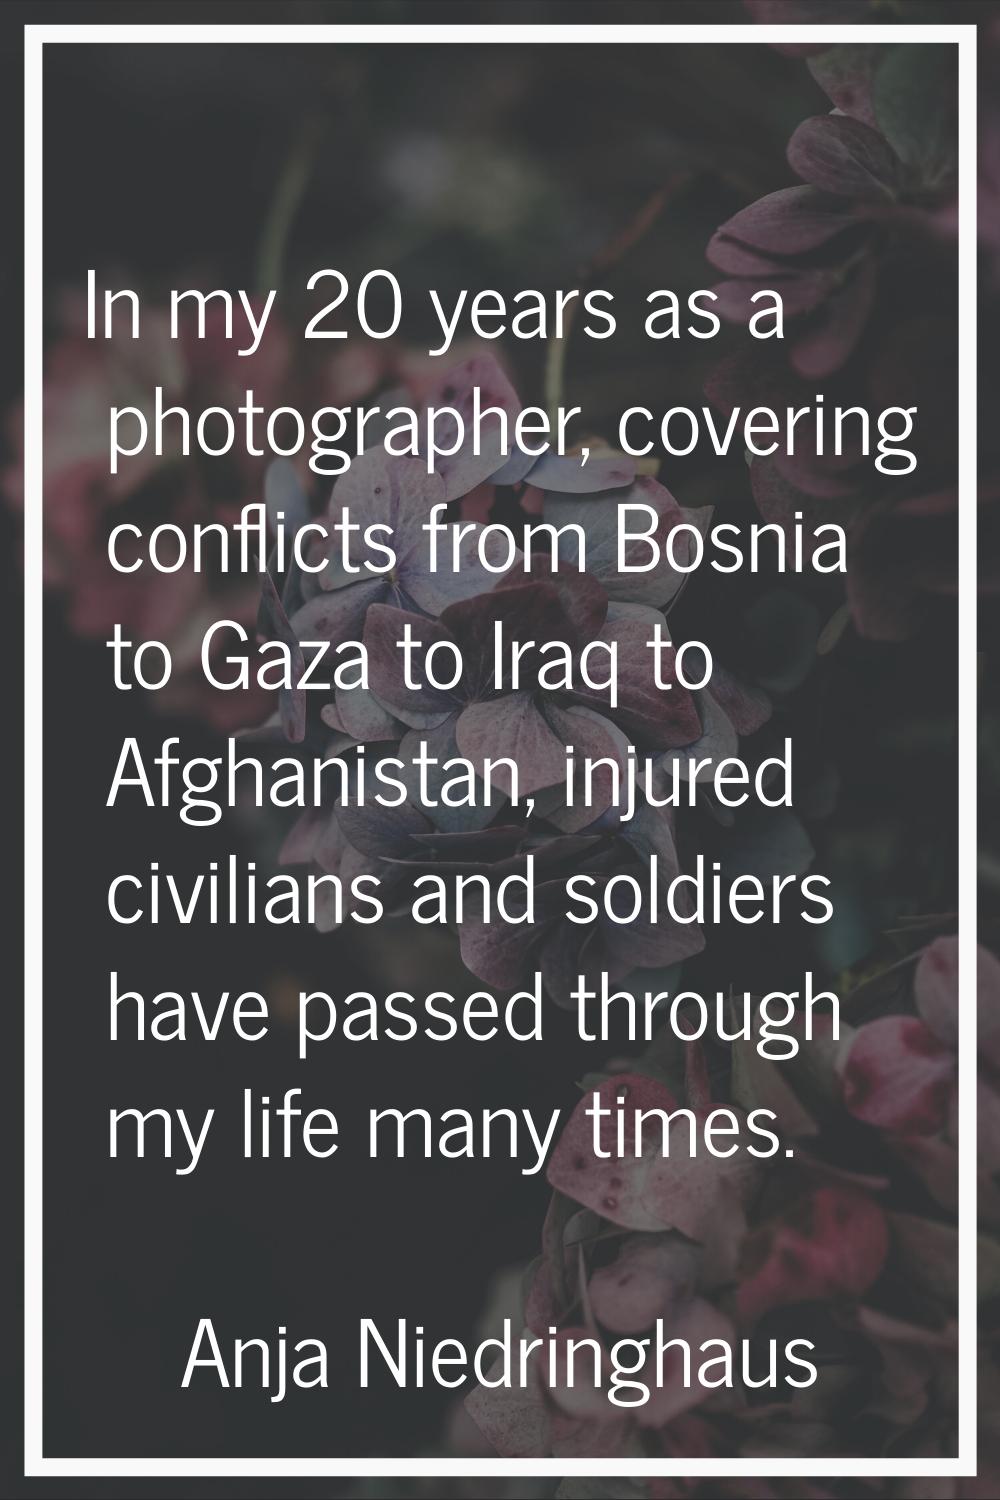 In my 20 years as a photographer, covering conflicts from Bosnia to Gaza to Iraq to Afghanistan, in